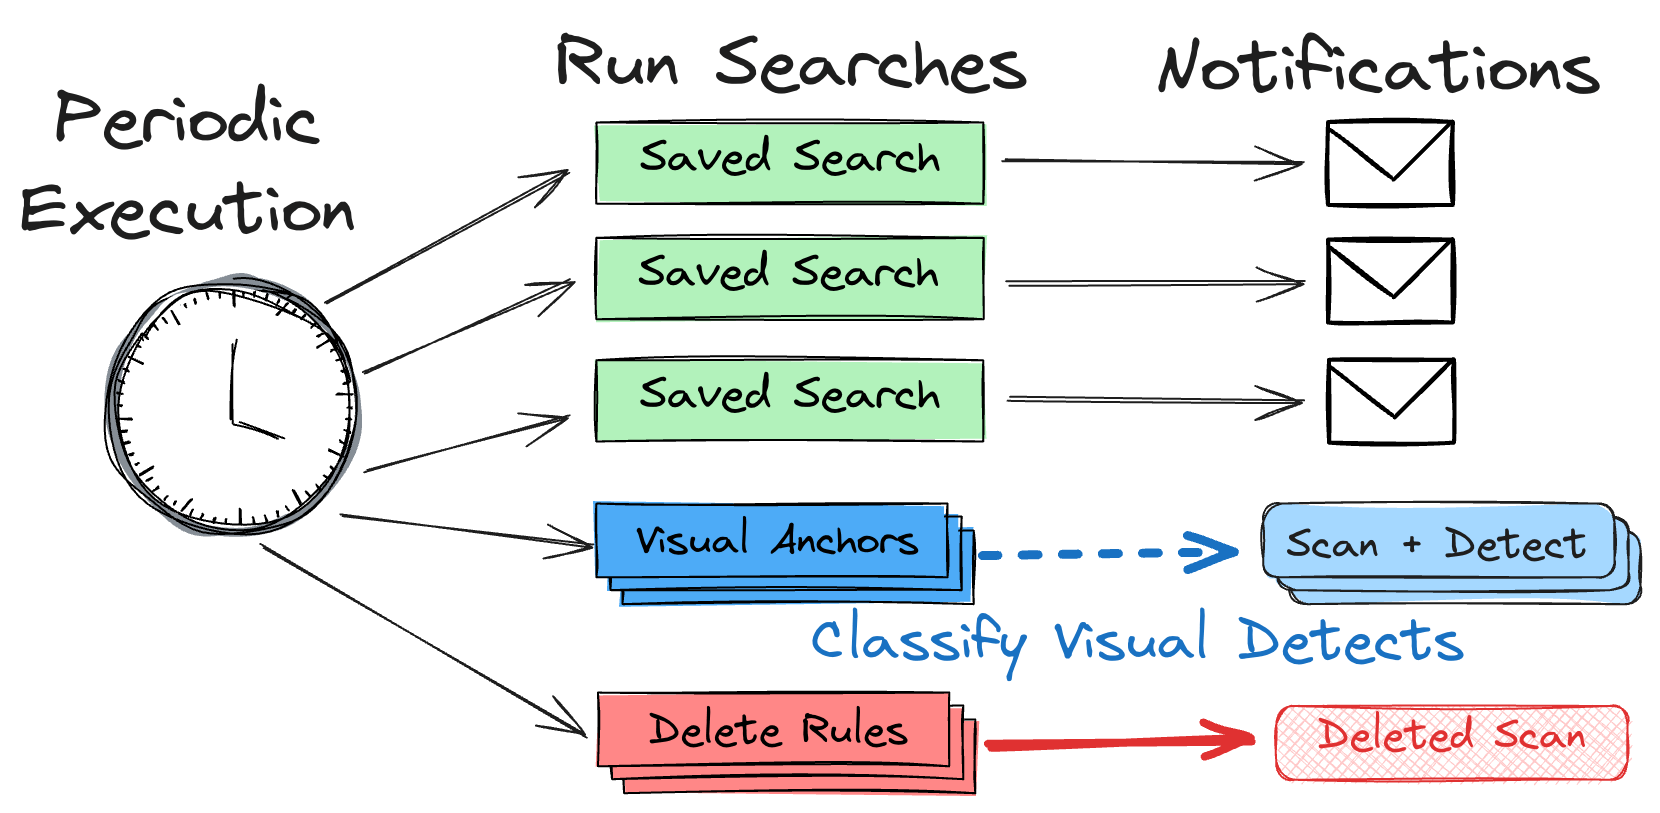 Saved Searches - Old Implementation